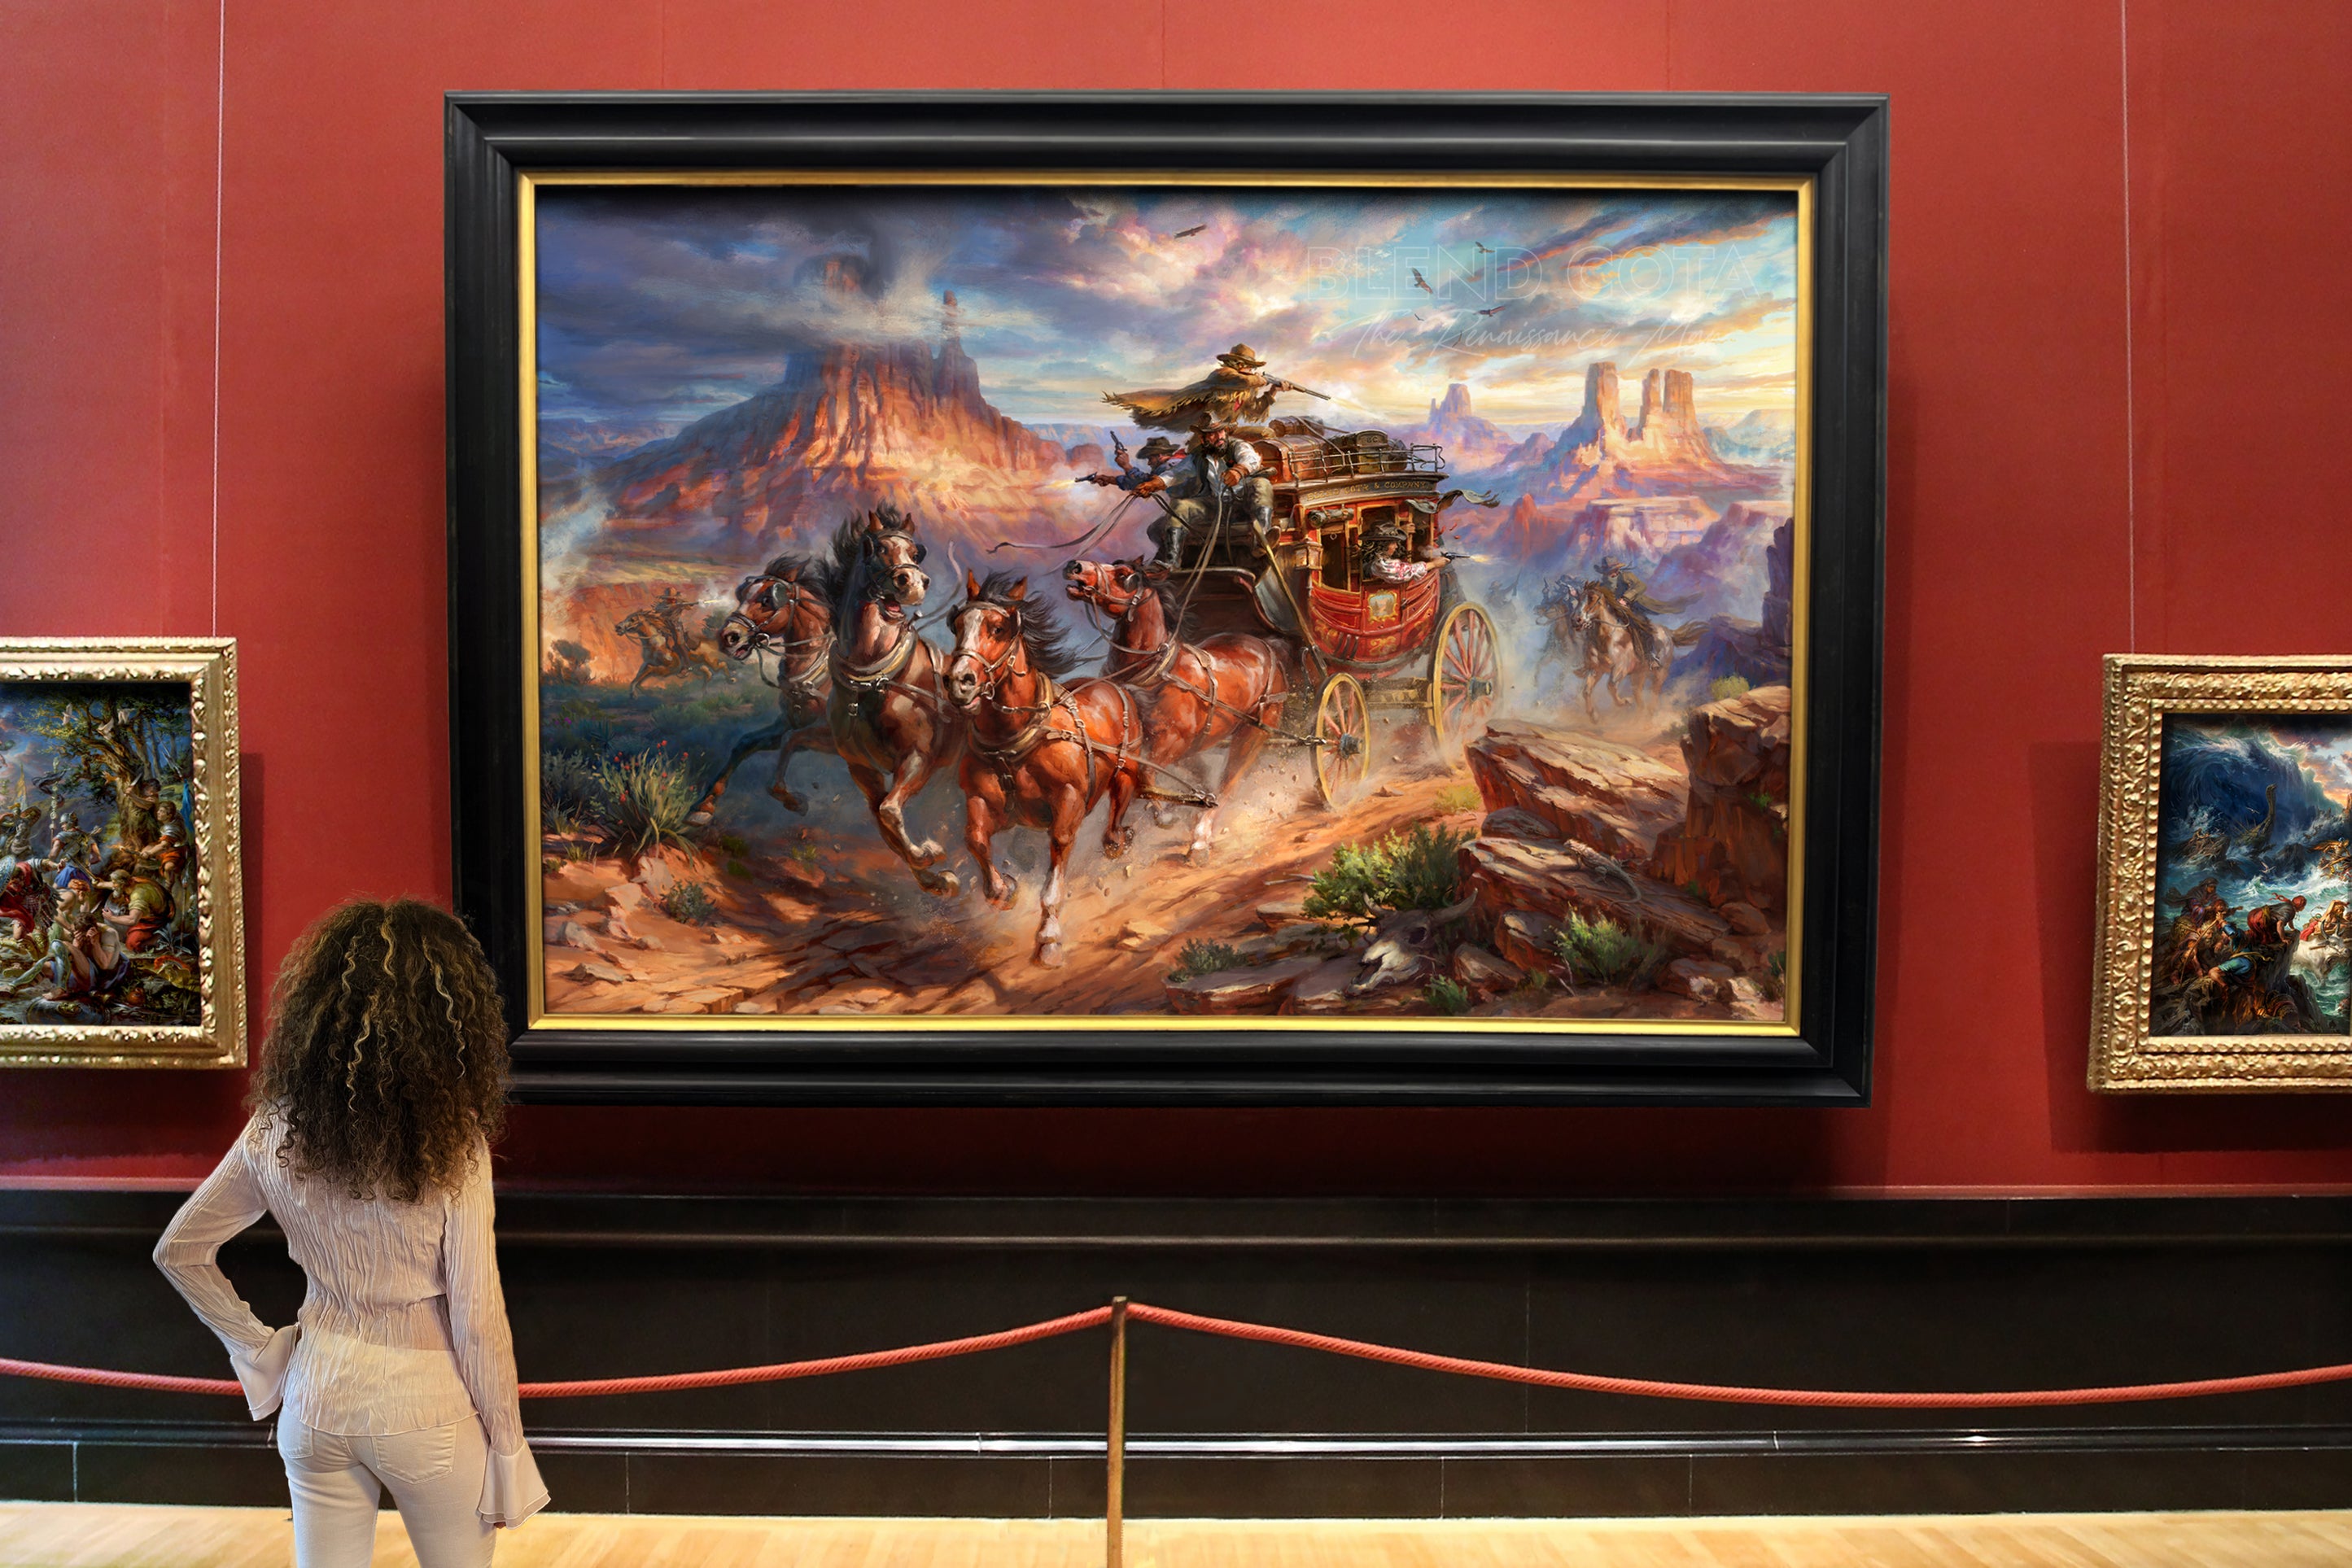 Oil on canvas original painting in art gallery room setting of outlaws attack on the Blend Cota stagecoach with cowboys shooting and horses galloping in canyons and landscape of Monument Valley, Arizona, in realism style with detailed brushstrokes.